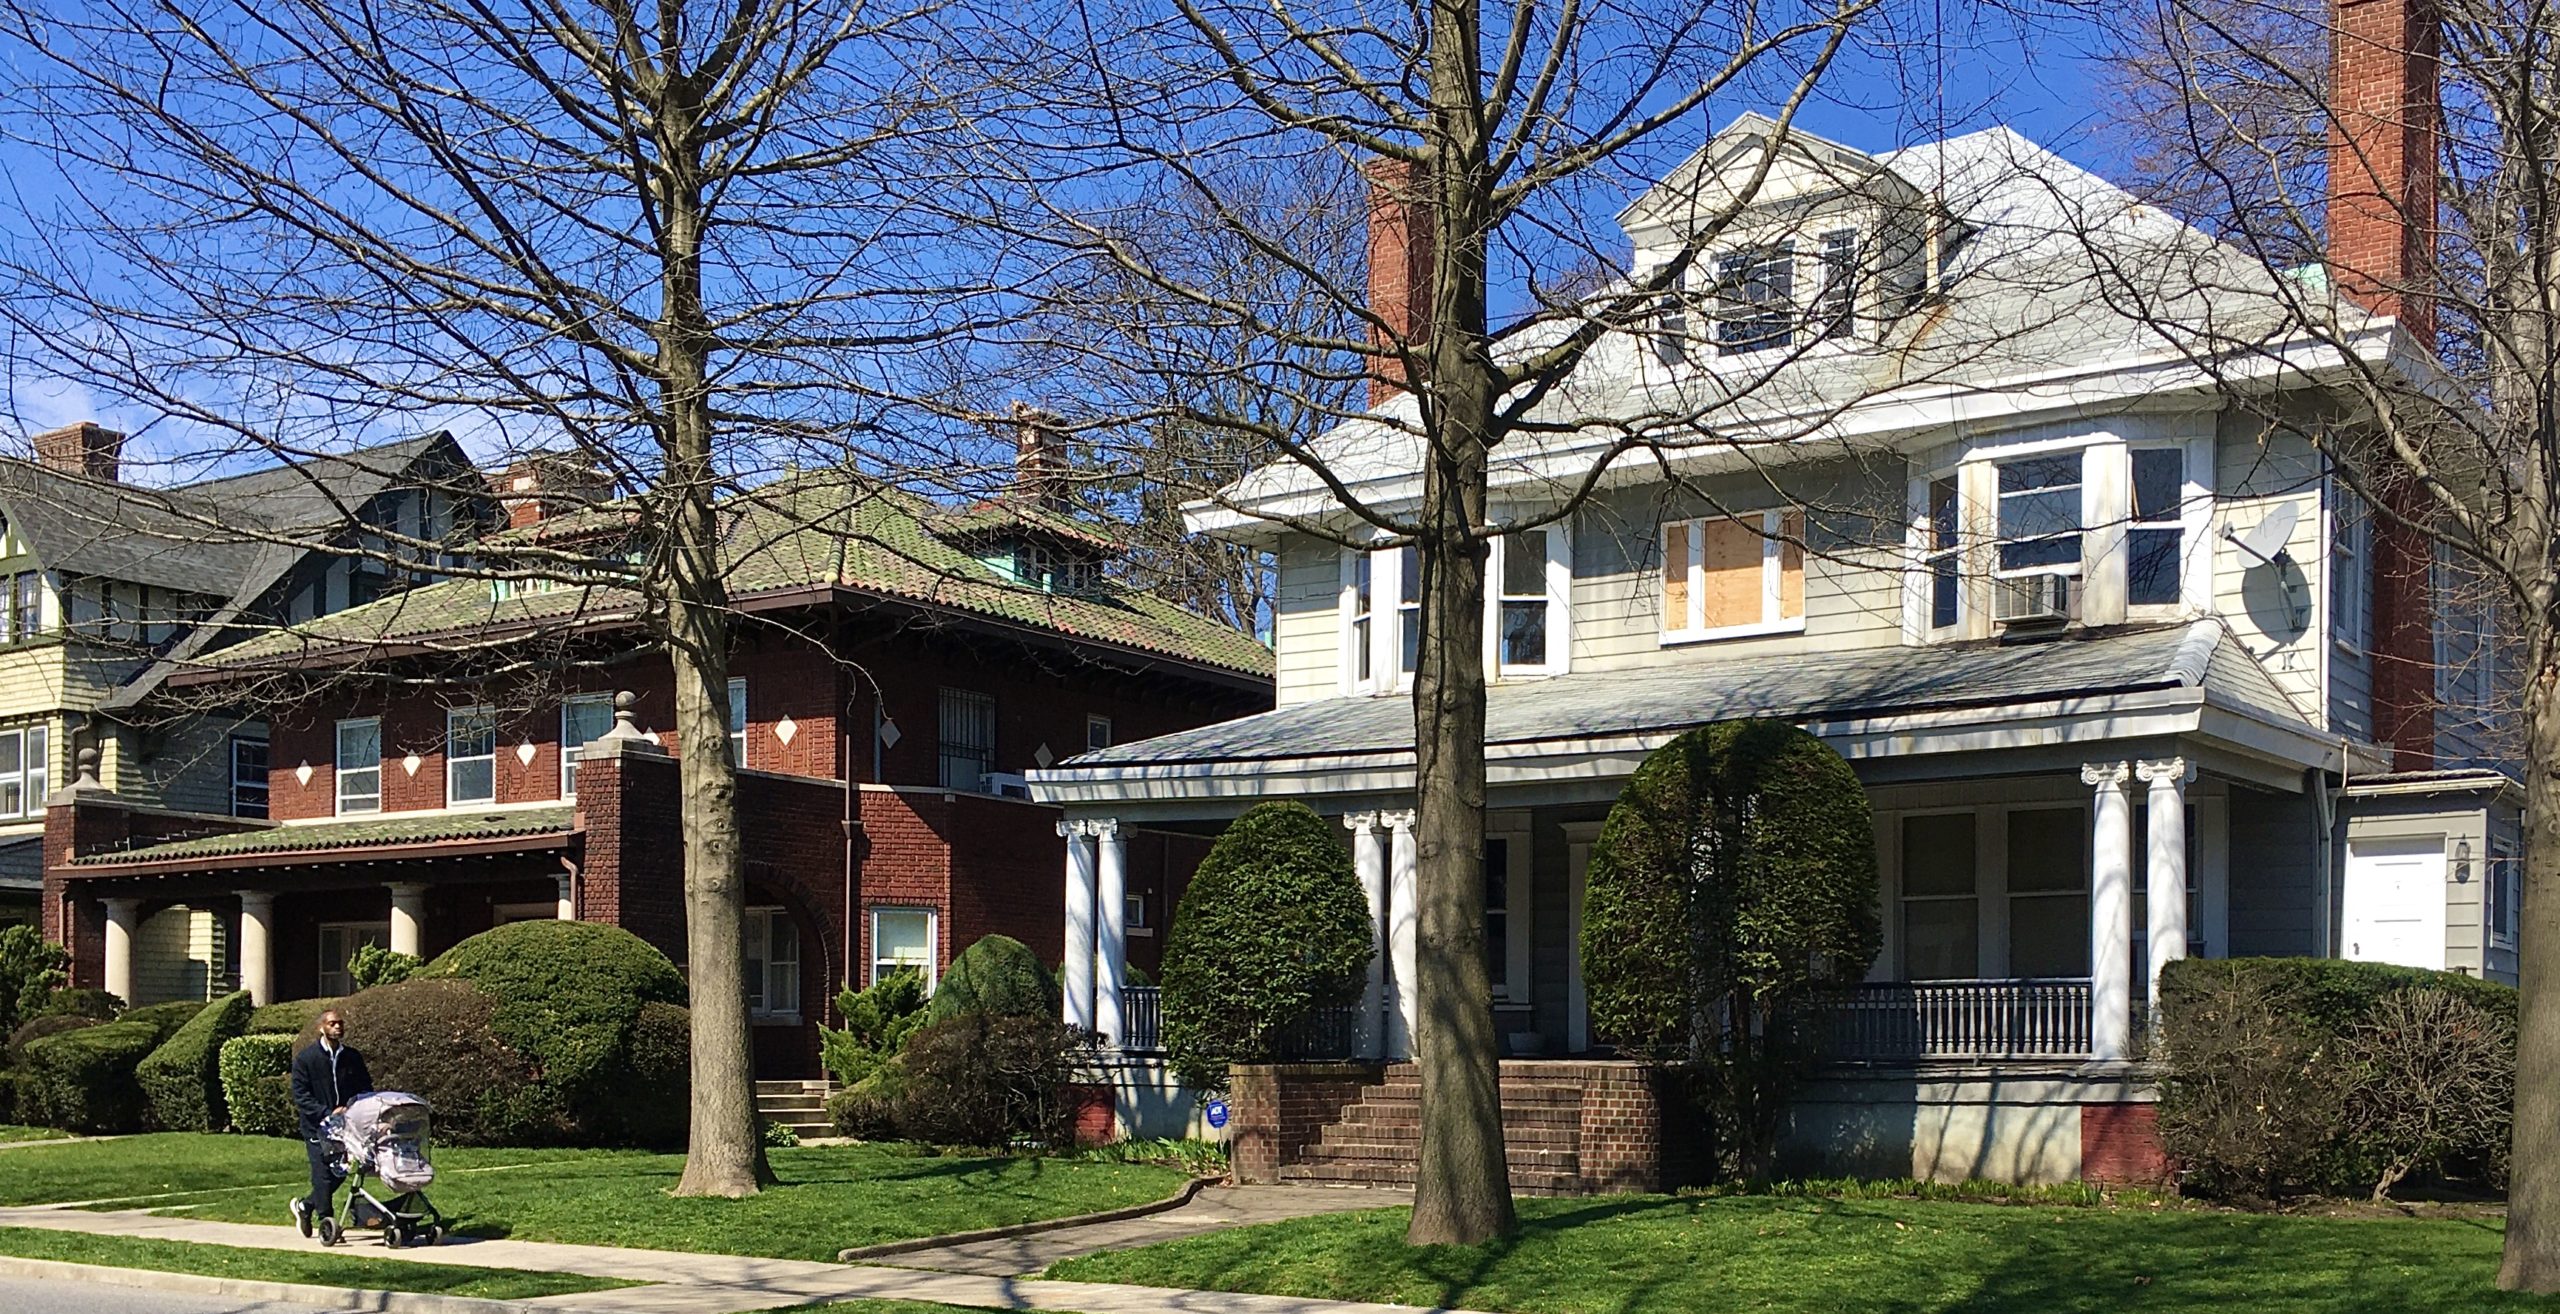 The house on the corner is 1221 Albemarle Road, which was sold in 2019. Photo: Lore Croghan/Brooklyn Eagle